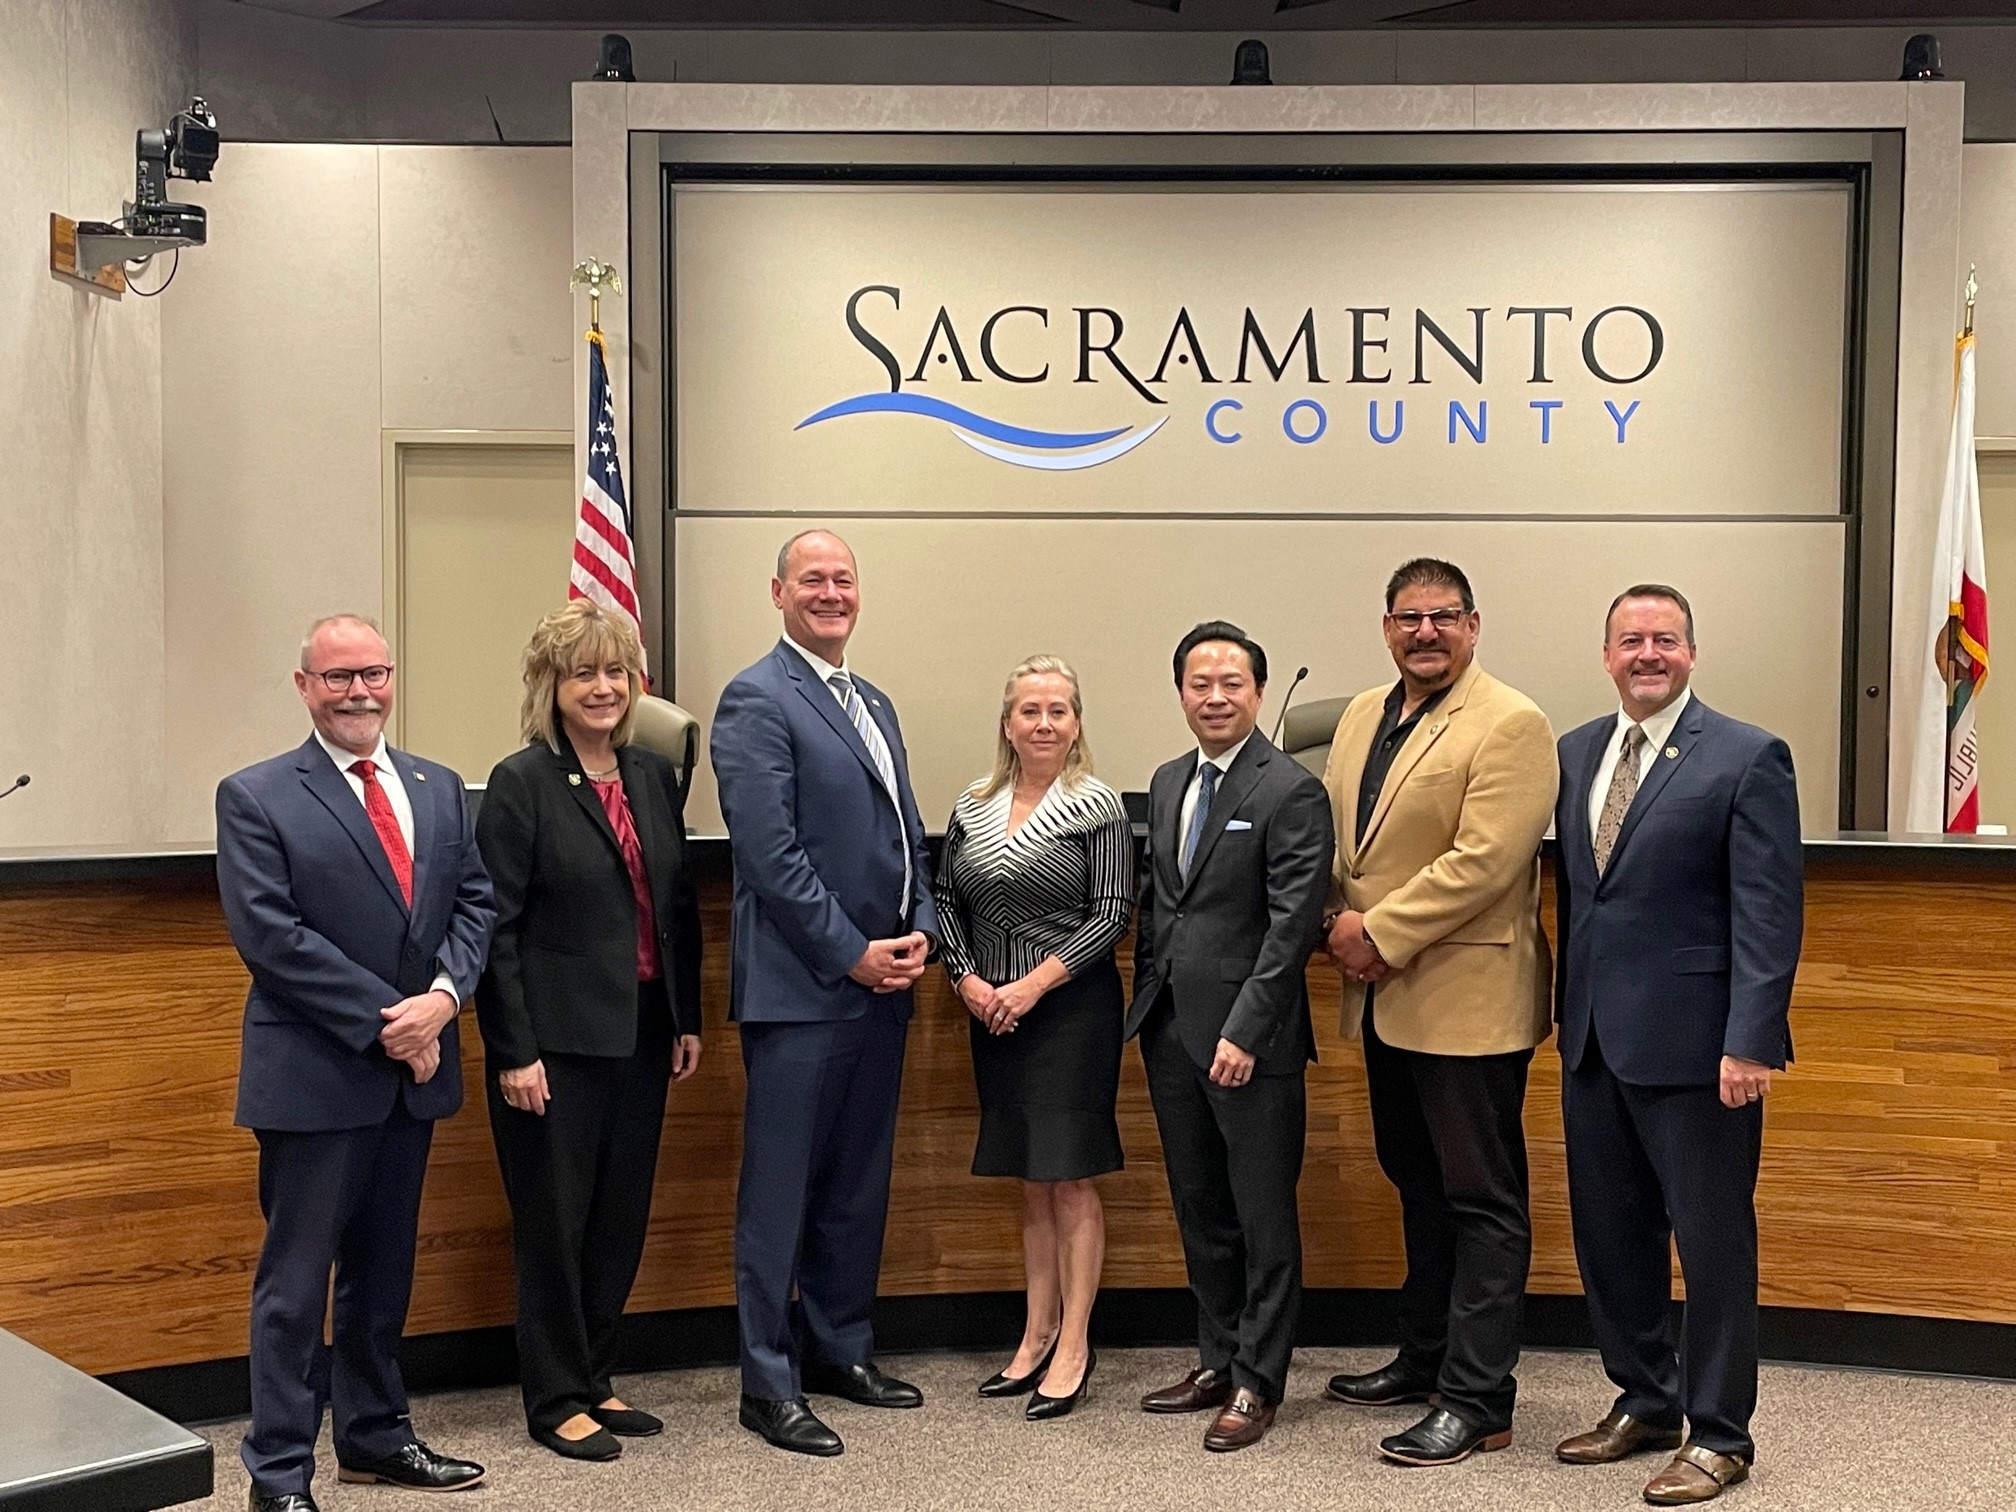 Members of the Sacramento County Board of Supervisors pose for a photo with Asessor, Christina  Wynn and DA Thien  Ho